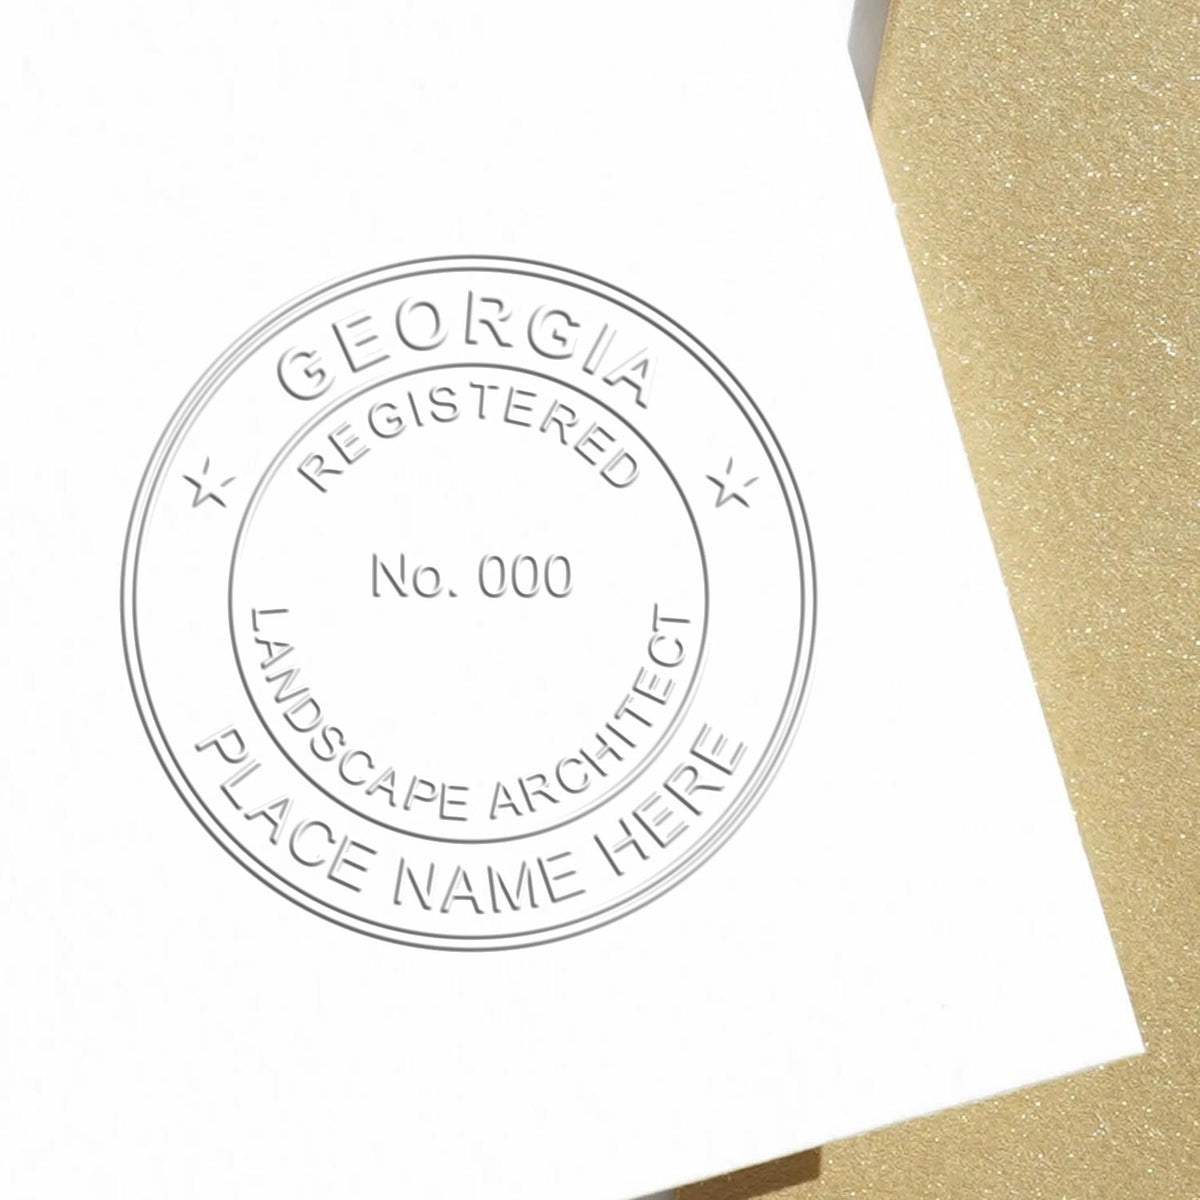 A photograph of the Hybrid Georgia Landscape Architect Seal stamp impression reveals a vivid, professional image of the on paper.